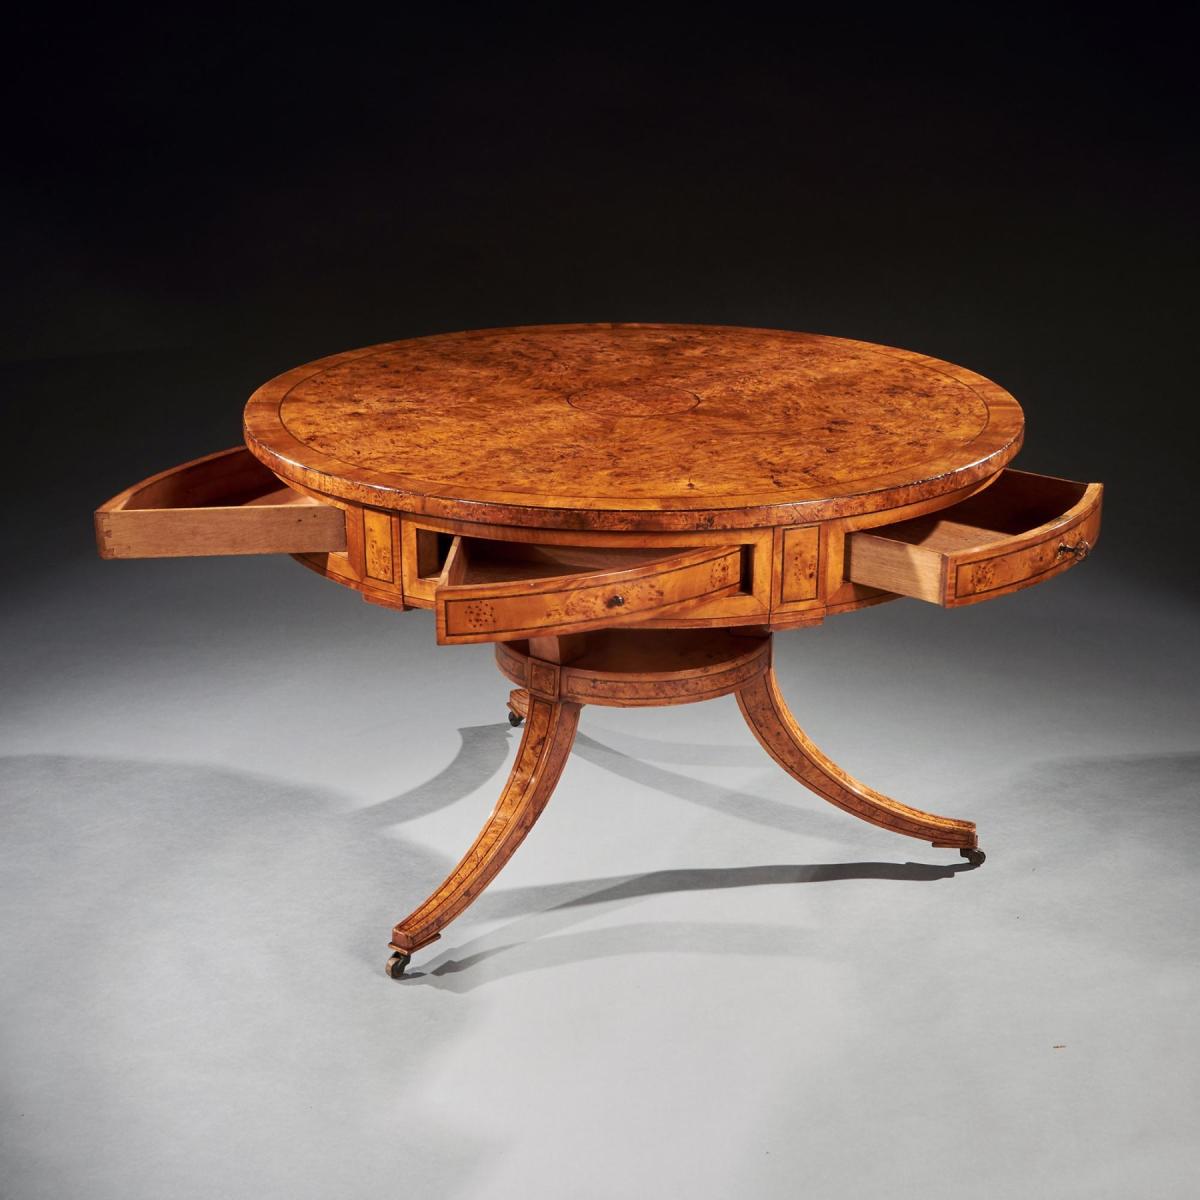 Early 19th Century Scandinavian Burr Root Maple Drum Table